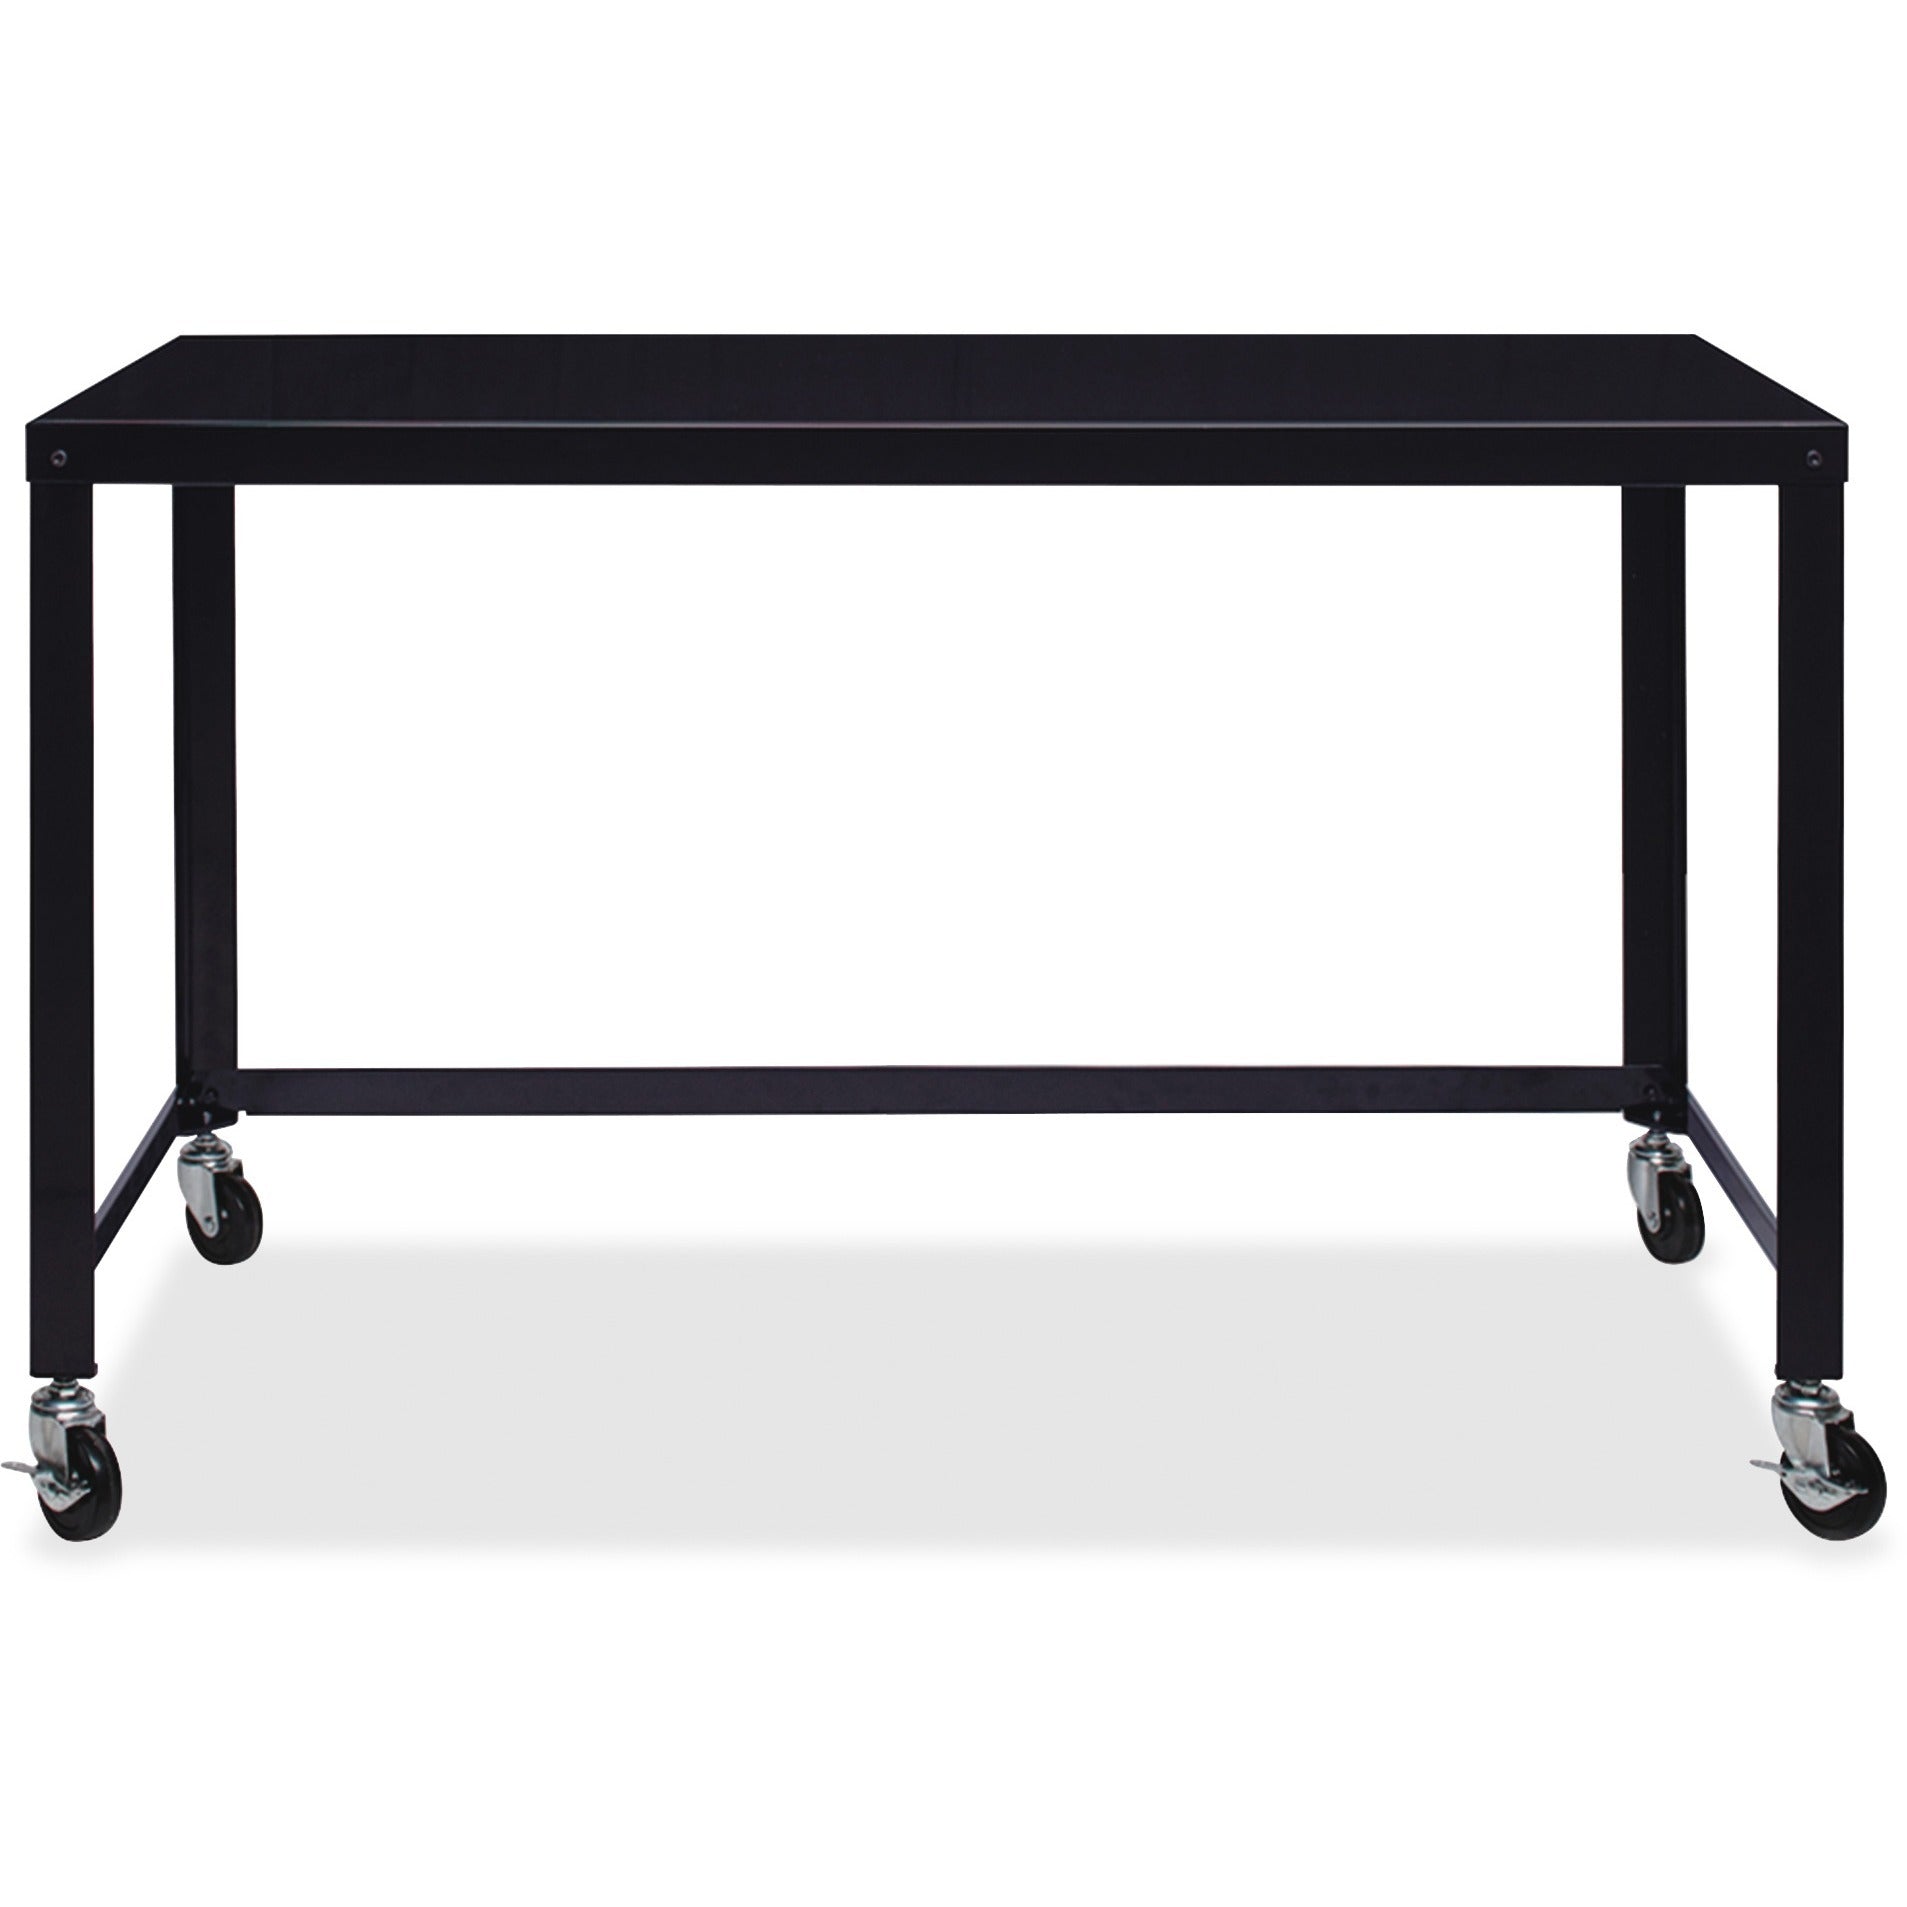 lorell-soho-personal-mobile-desk-for-table-toprectangle-top-x-48-table-top-width-x-23-table-top-depth-2950-height-assembly-required-black-1-each_llr34417 - 2